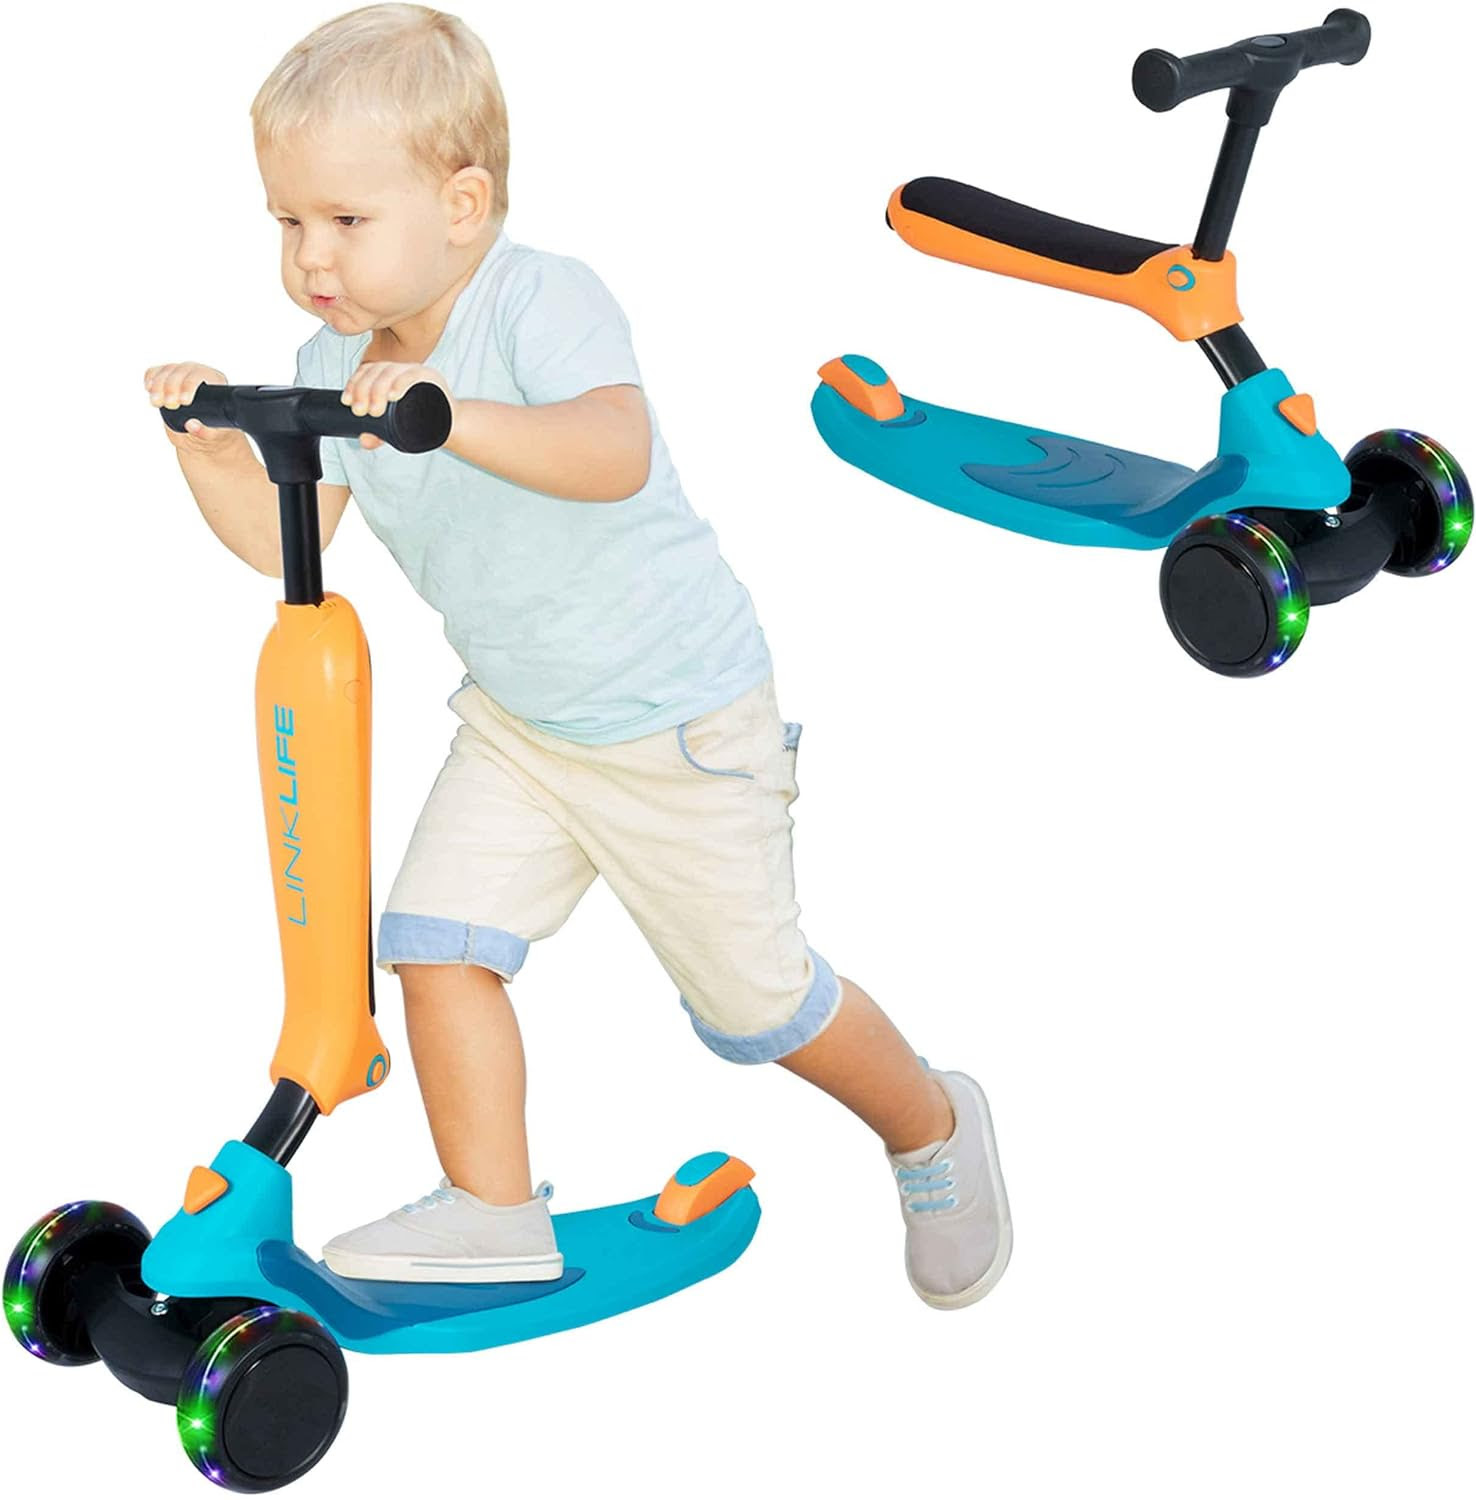 LINKLIFE 2 in 1 Toddler Scooter. 1189 units. EXW Los Angeles $15.00 unit.